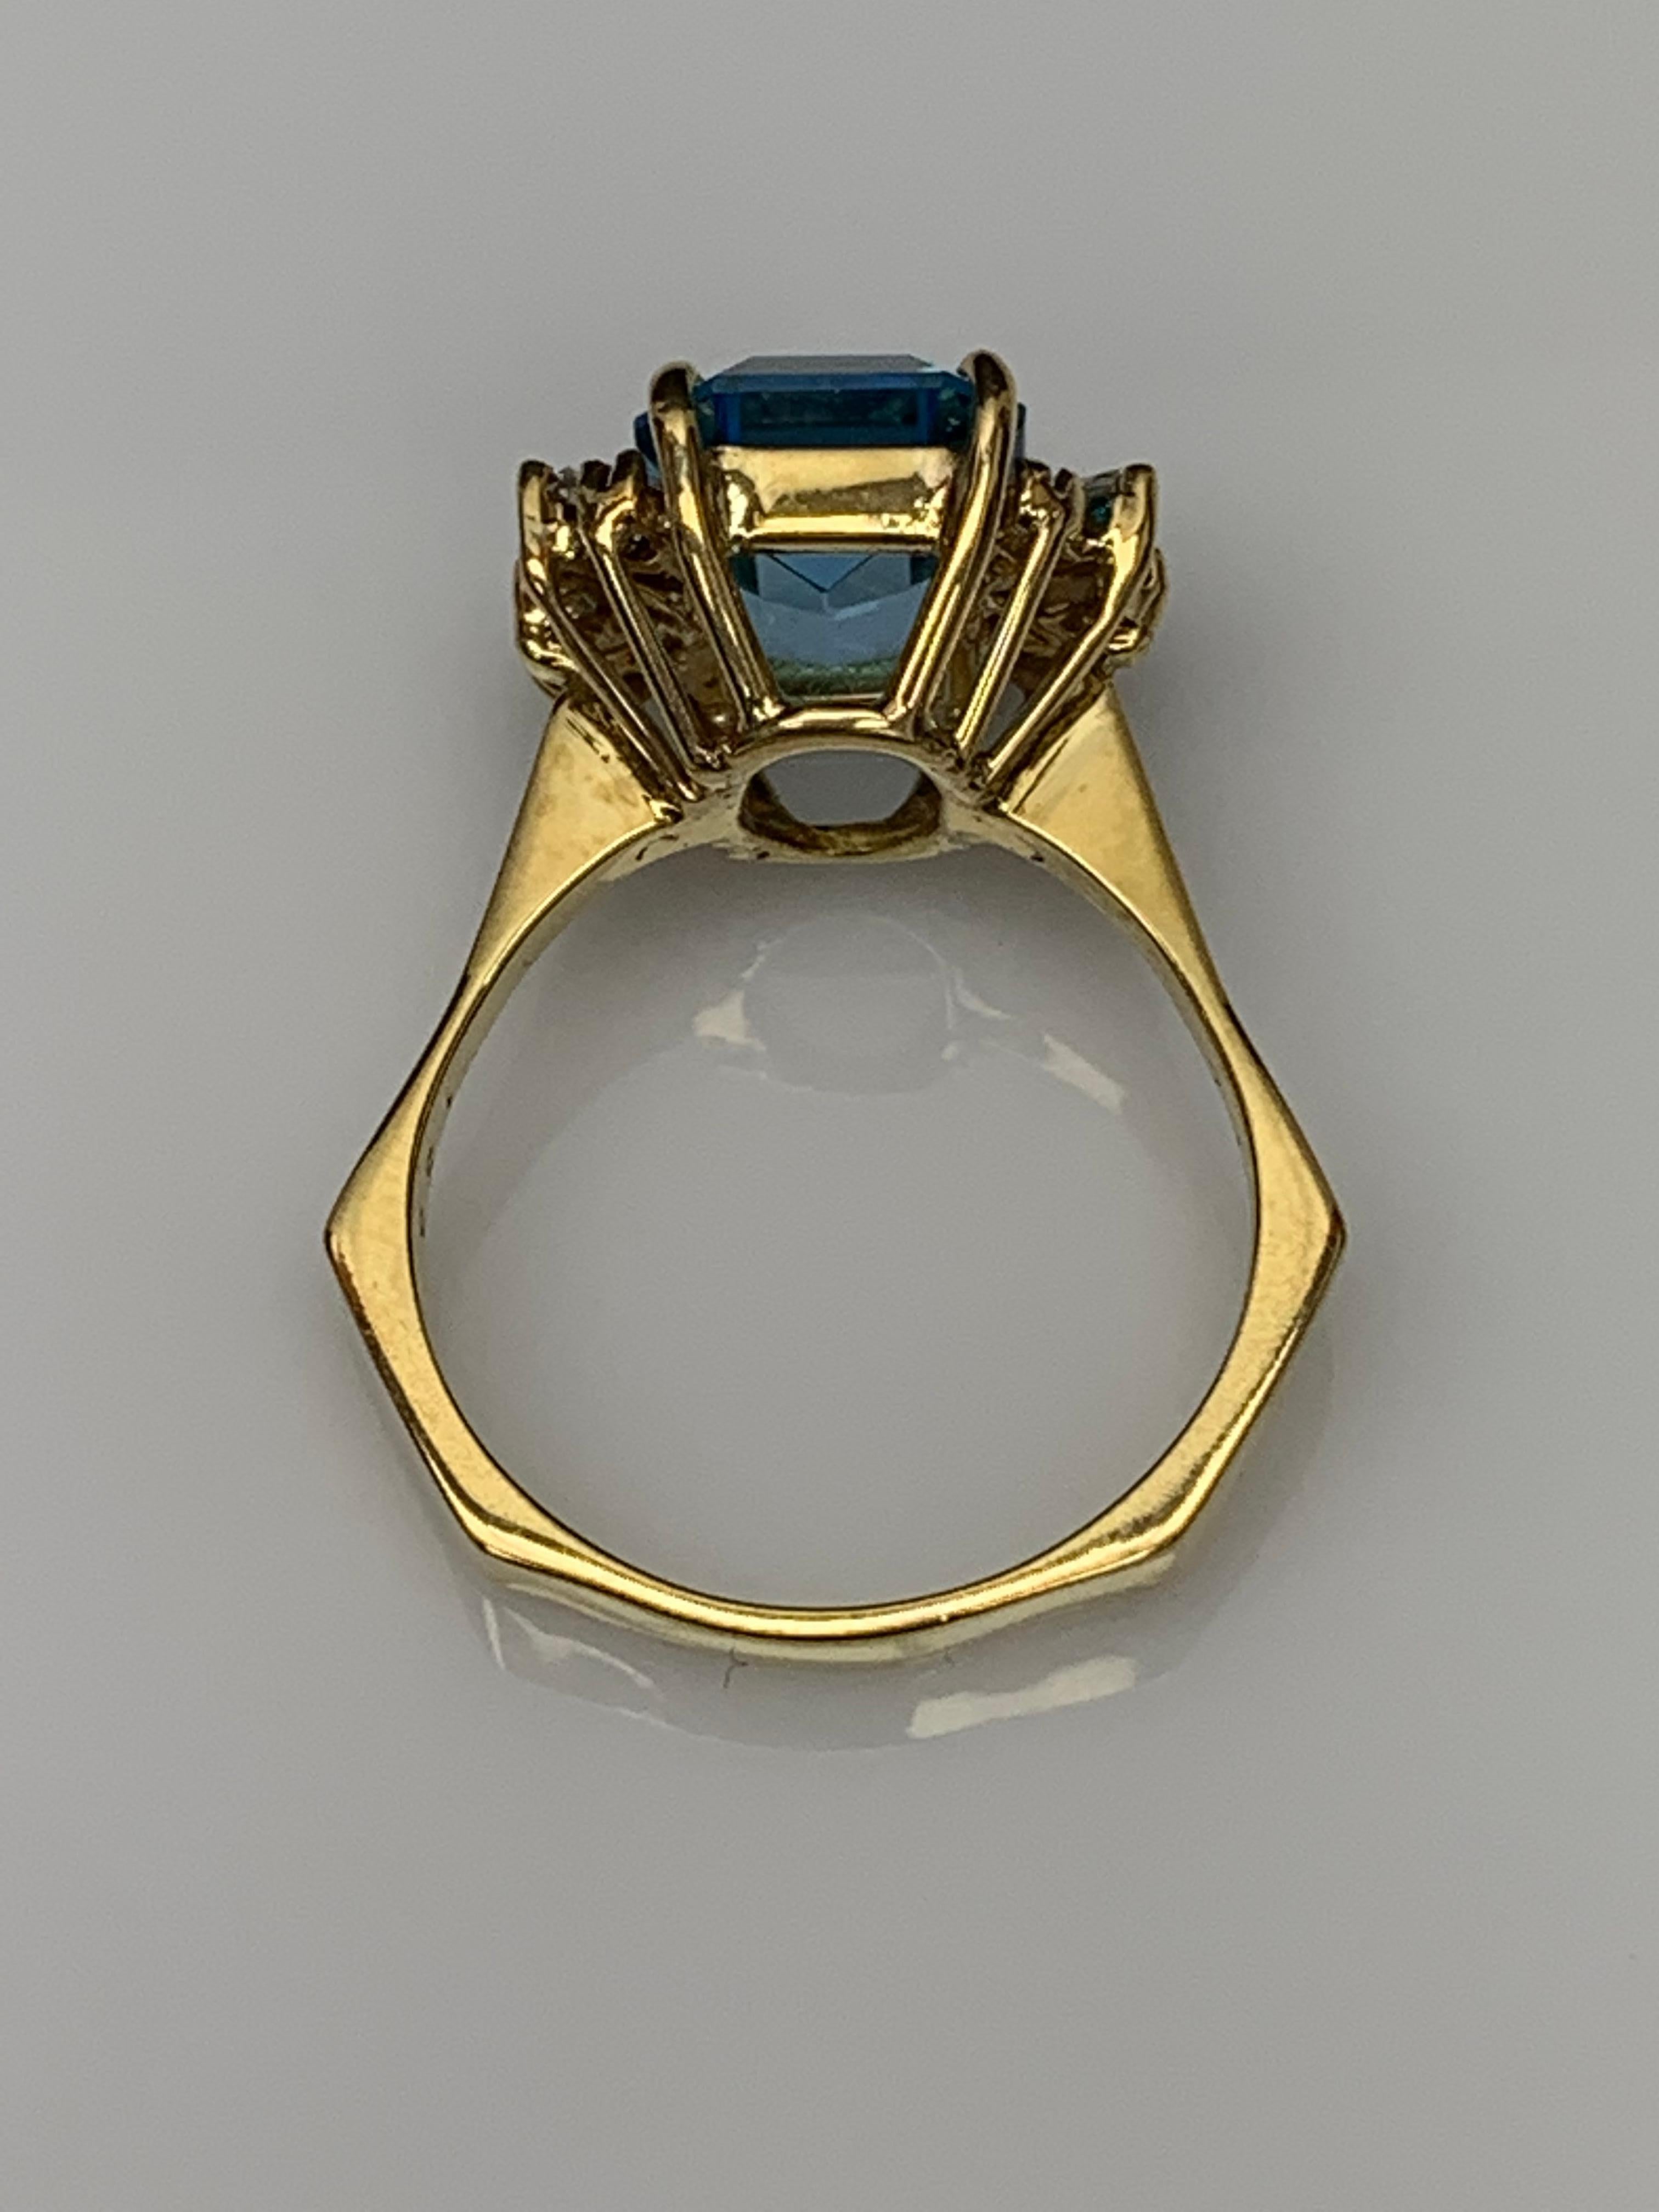 3.98 Carat Emerald Cut Blue Topaz and Diamond Ring in 14K Yellow Gold For Sale 1